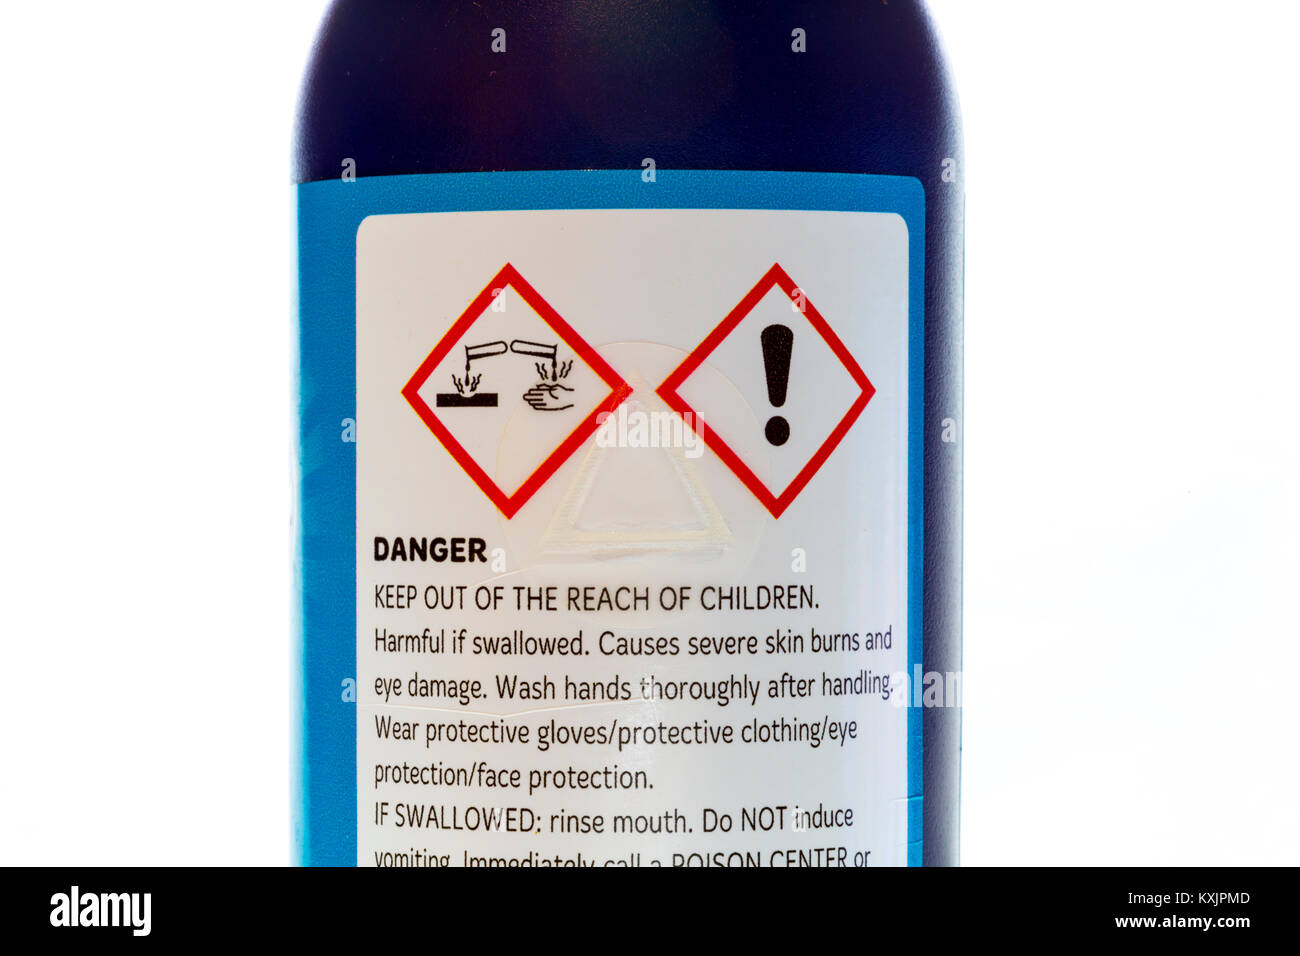 The international pictogram for corrosive chemicals. On a bottle of cleaner. Stock Photo